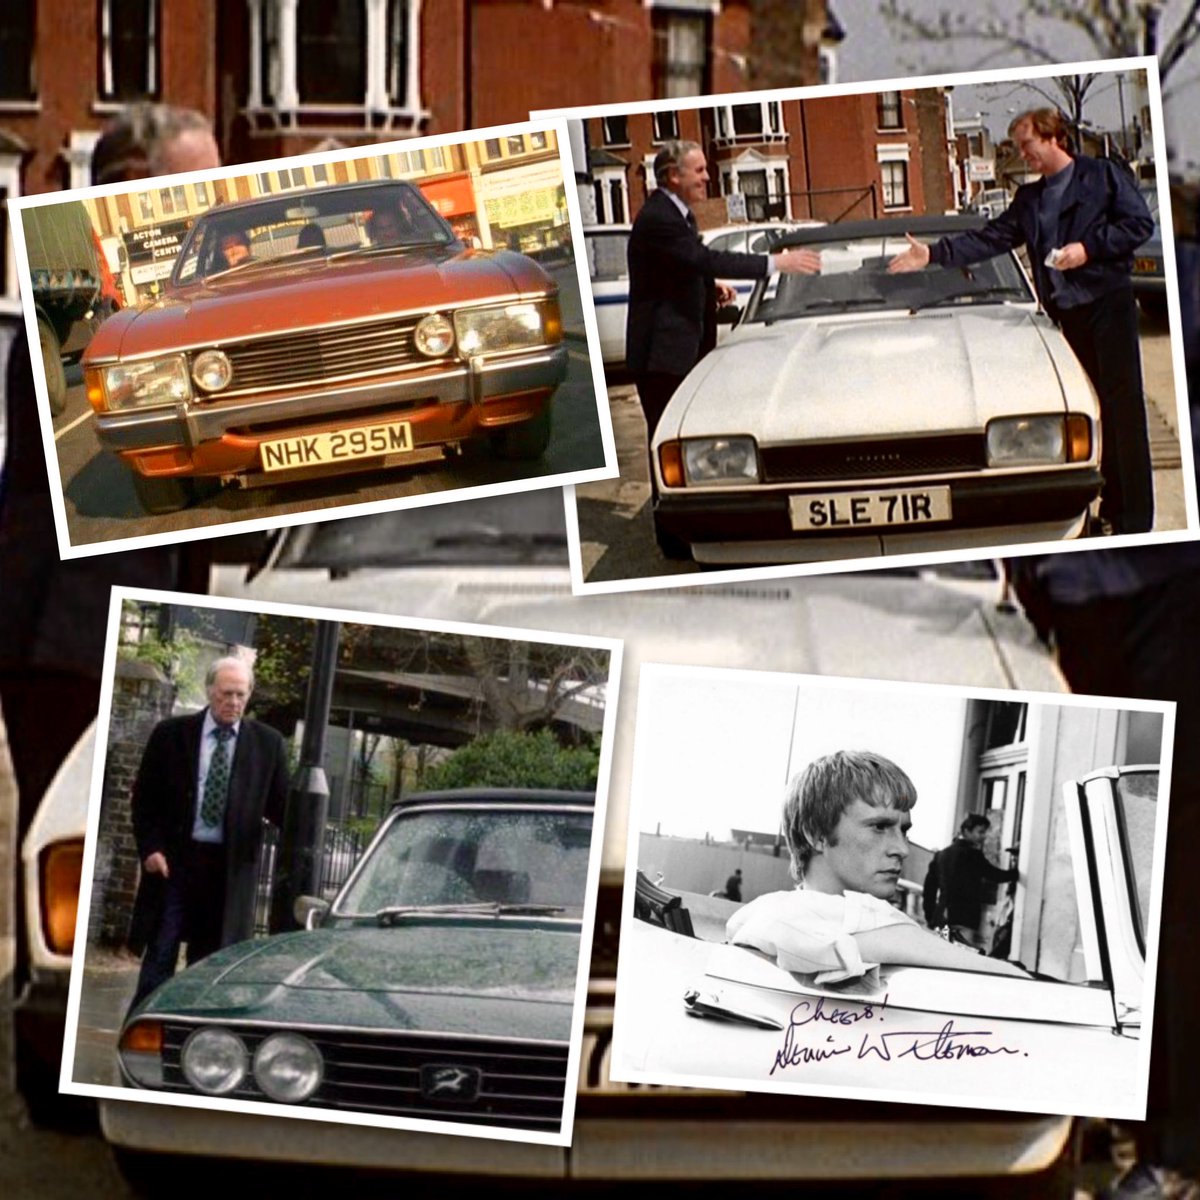 Remembering Dennis Waterman, legendary actor for over six decades and singer, born #OnThisDay in 1948. 

📷 A few of the iconic cars from Dennis’s career. 

#TheSweeney #FordConsul 
#Minder #FordCapri 
#NewTricks #TriumphStag 
#UpTheJunction #JaguarEType 

#FordFriday